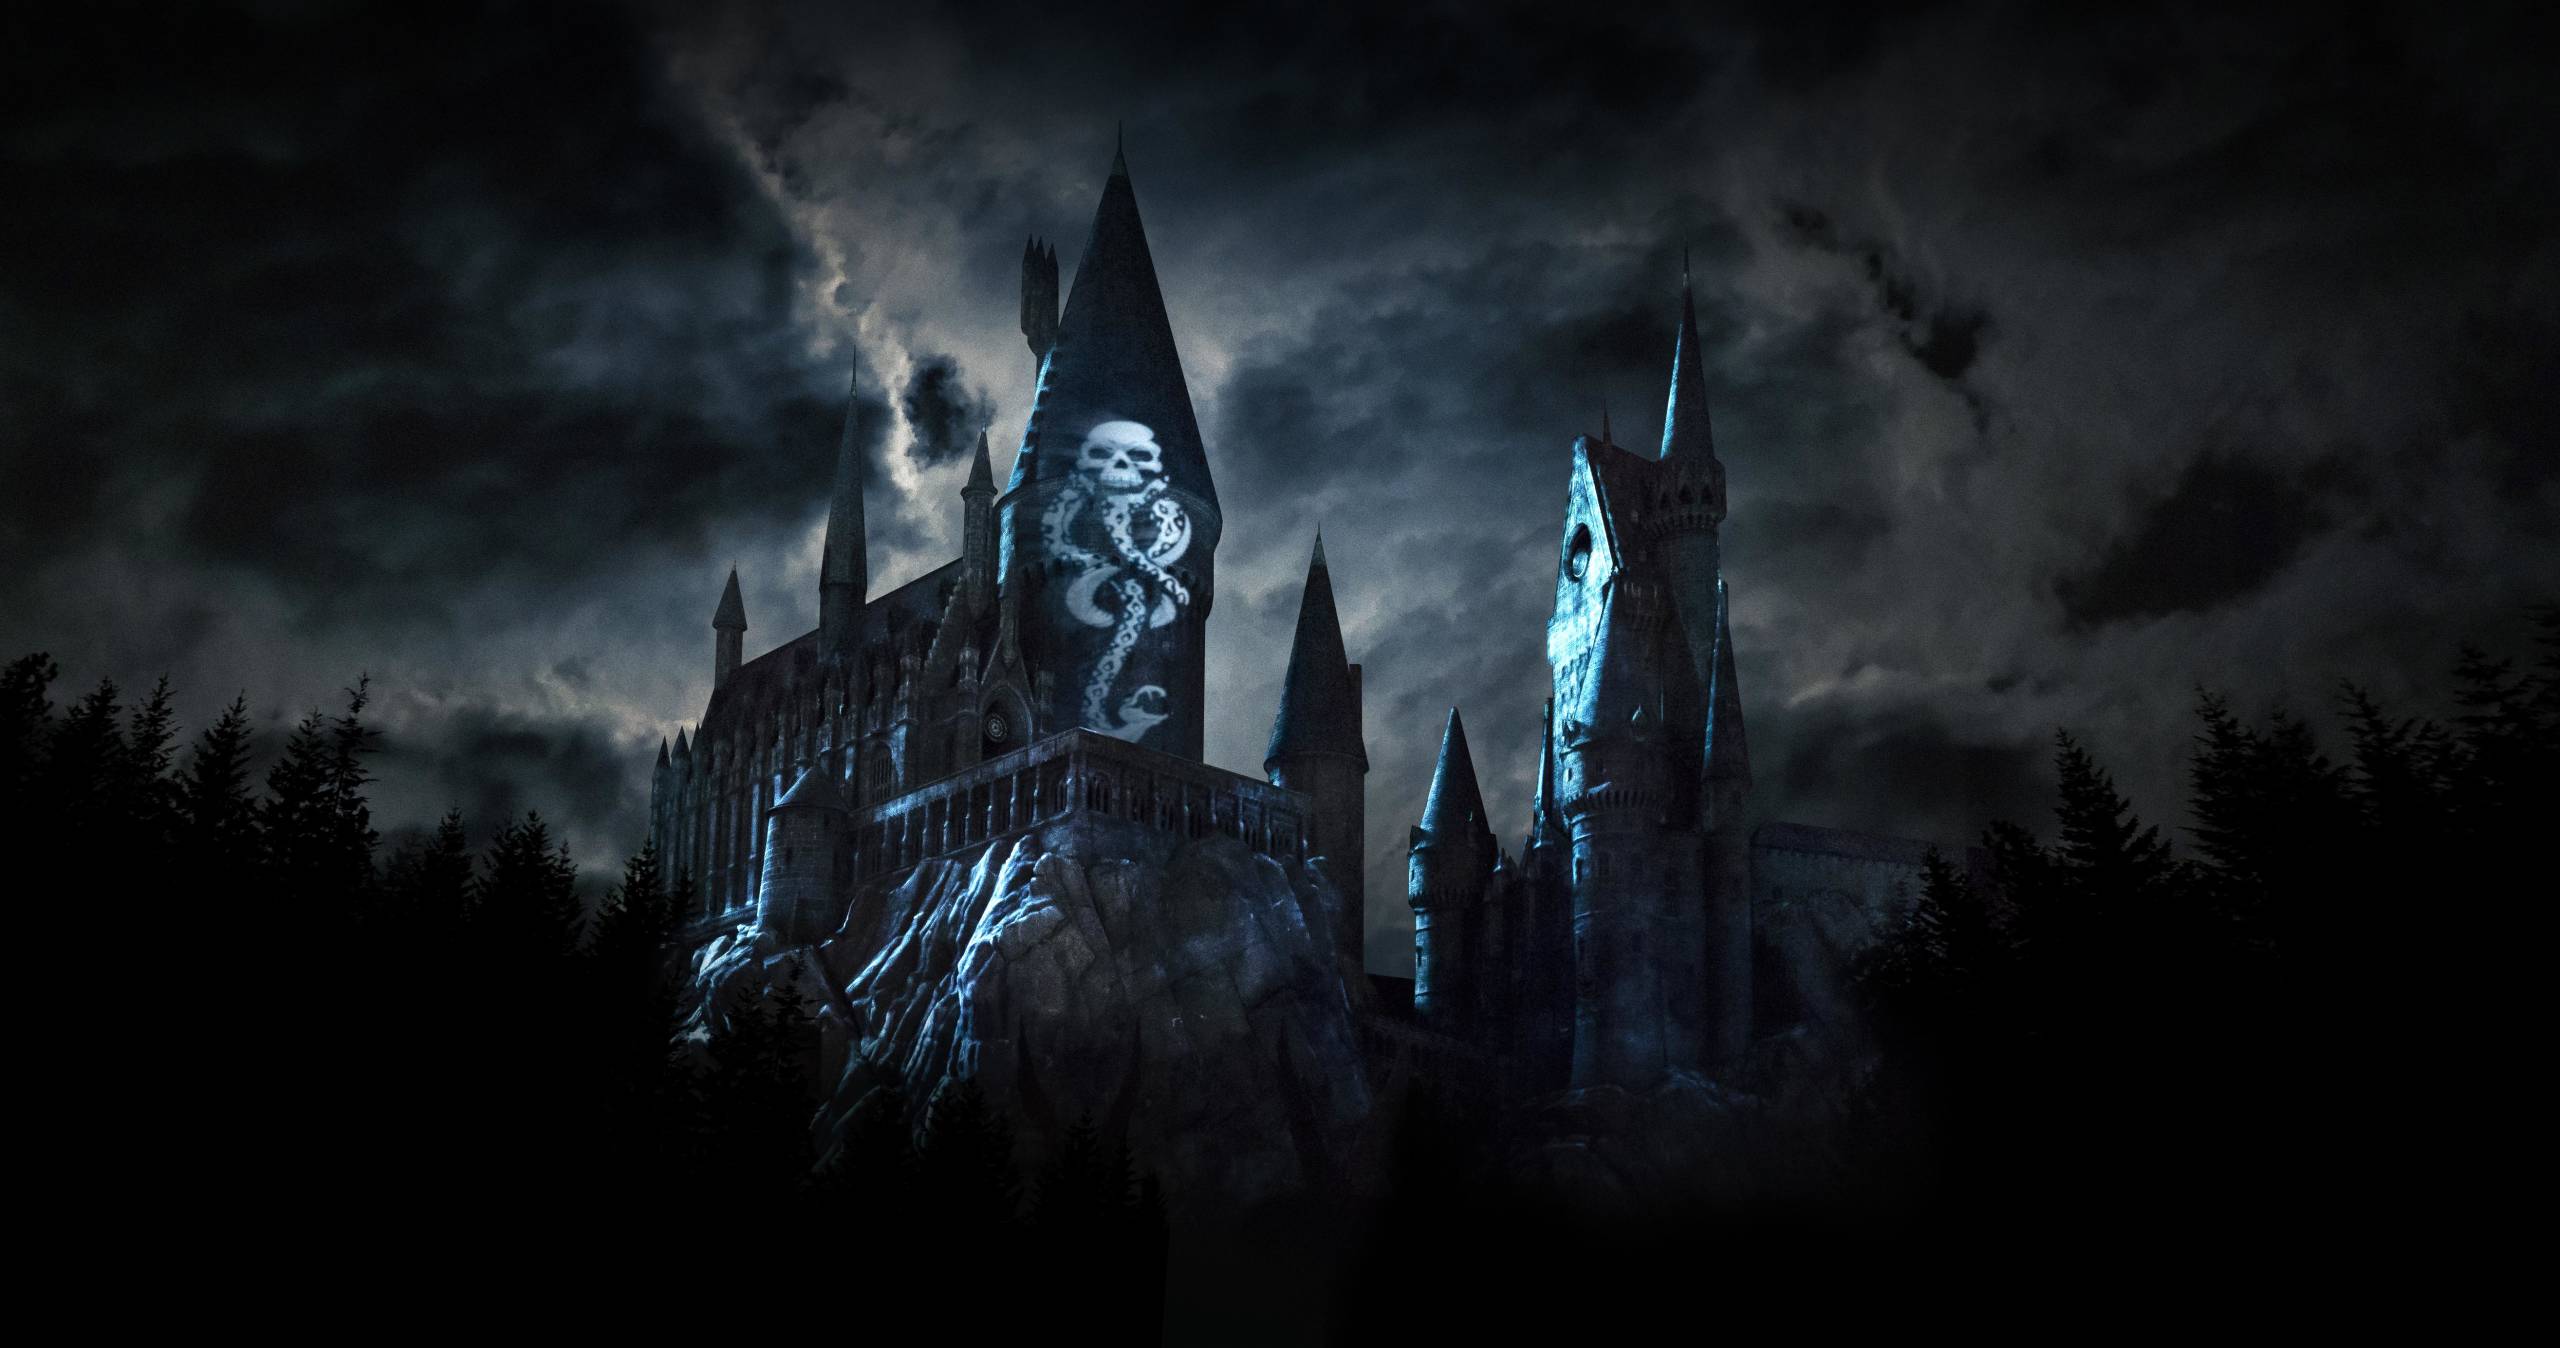 The Wizarding World of Harry Potter at Universal Studios to launch new “Dark Arts at Hogwarts Castle” light projection experience 